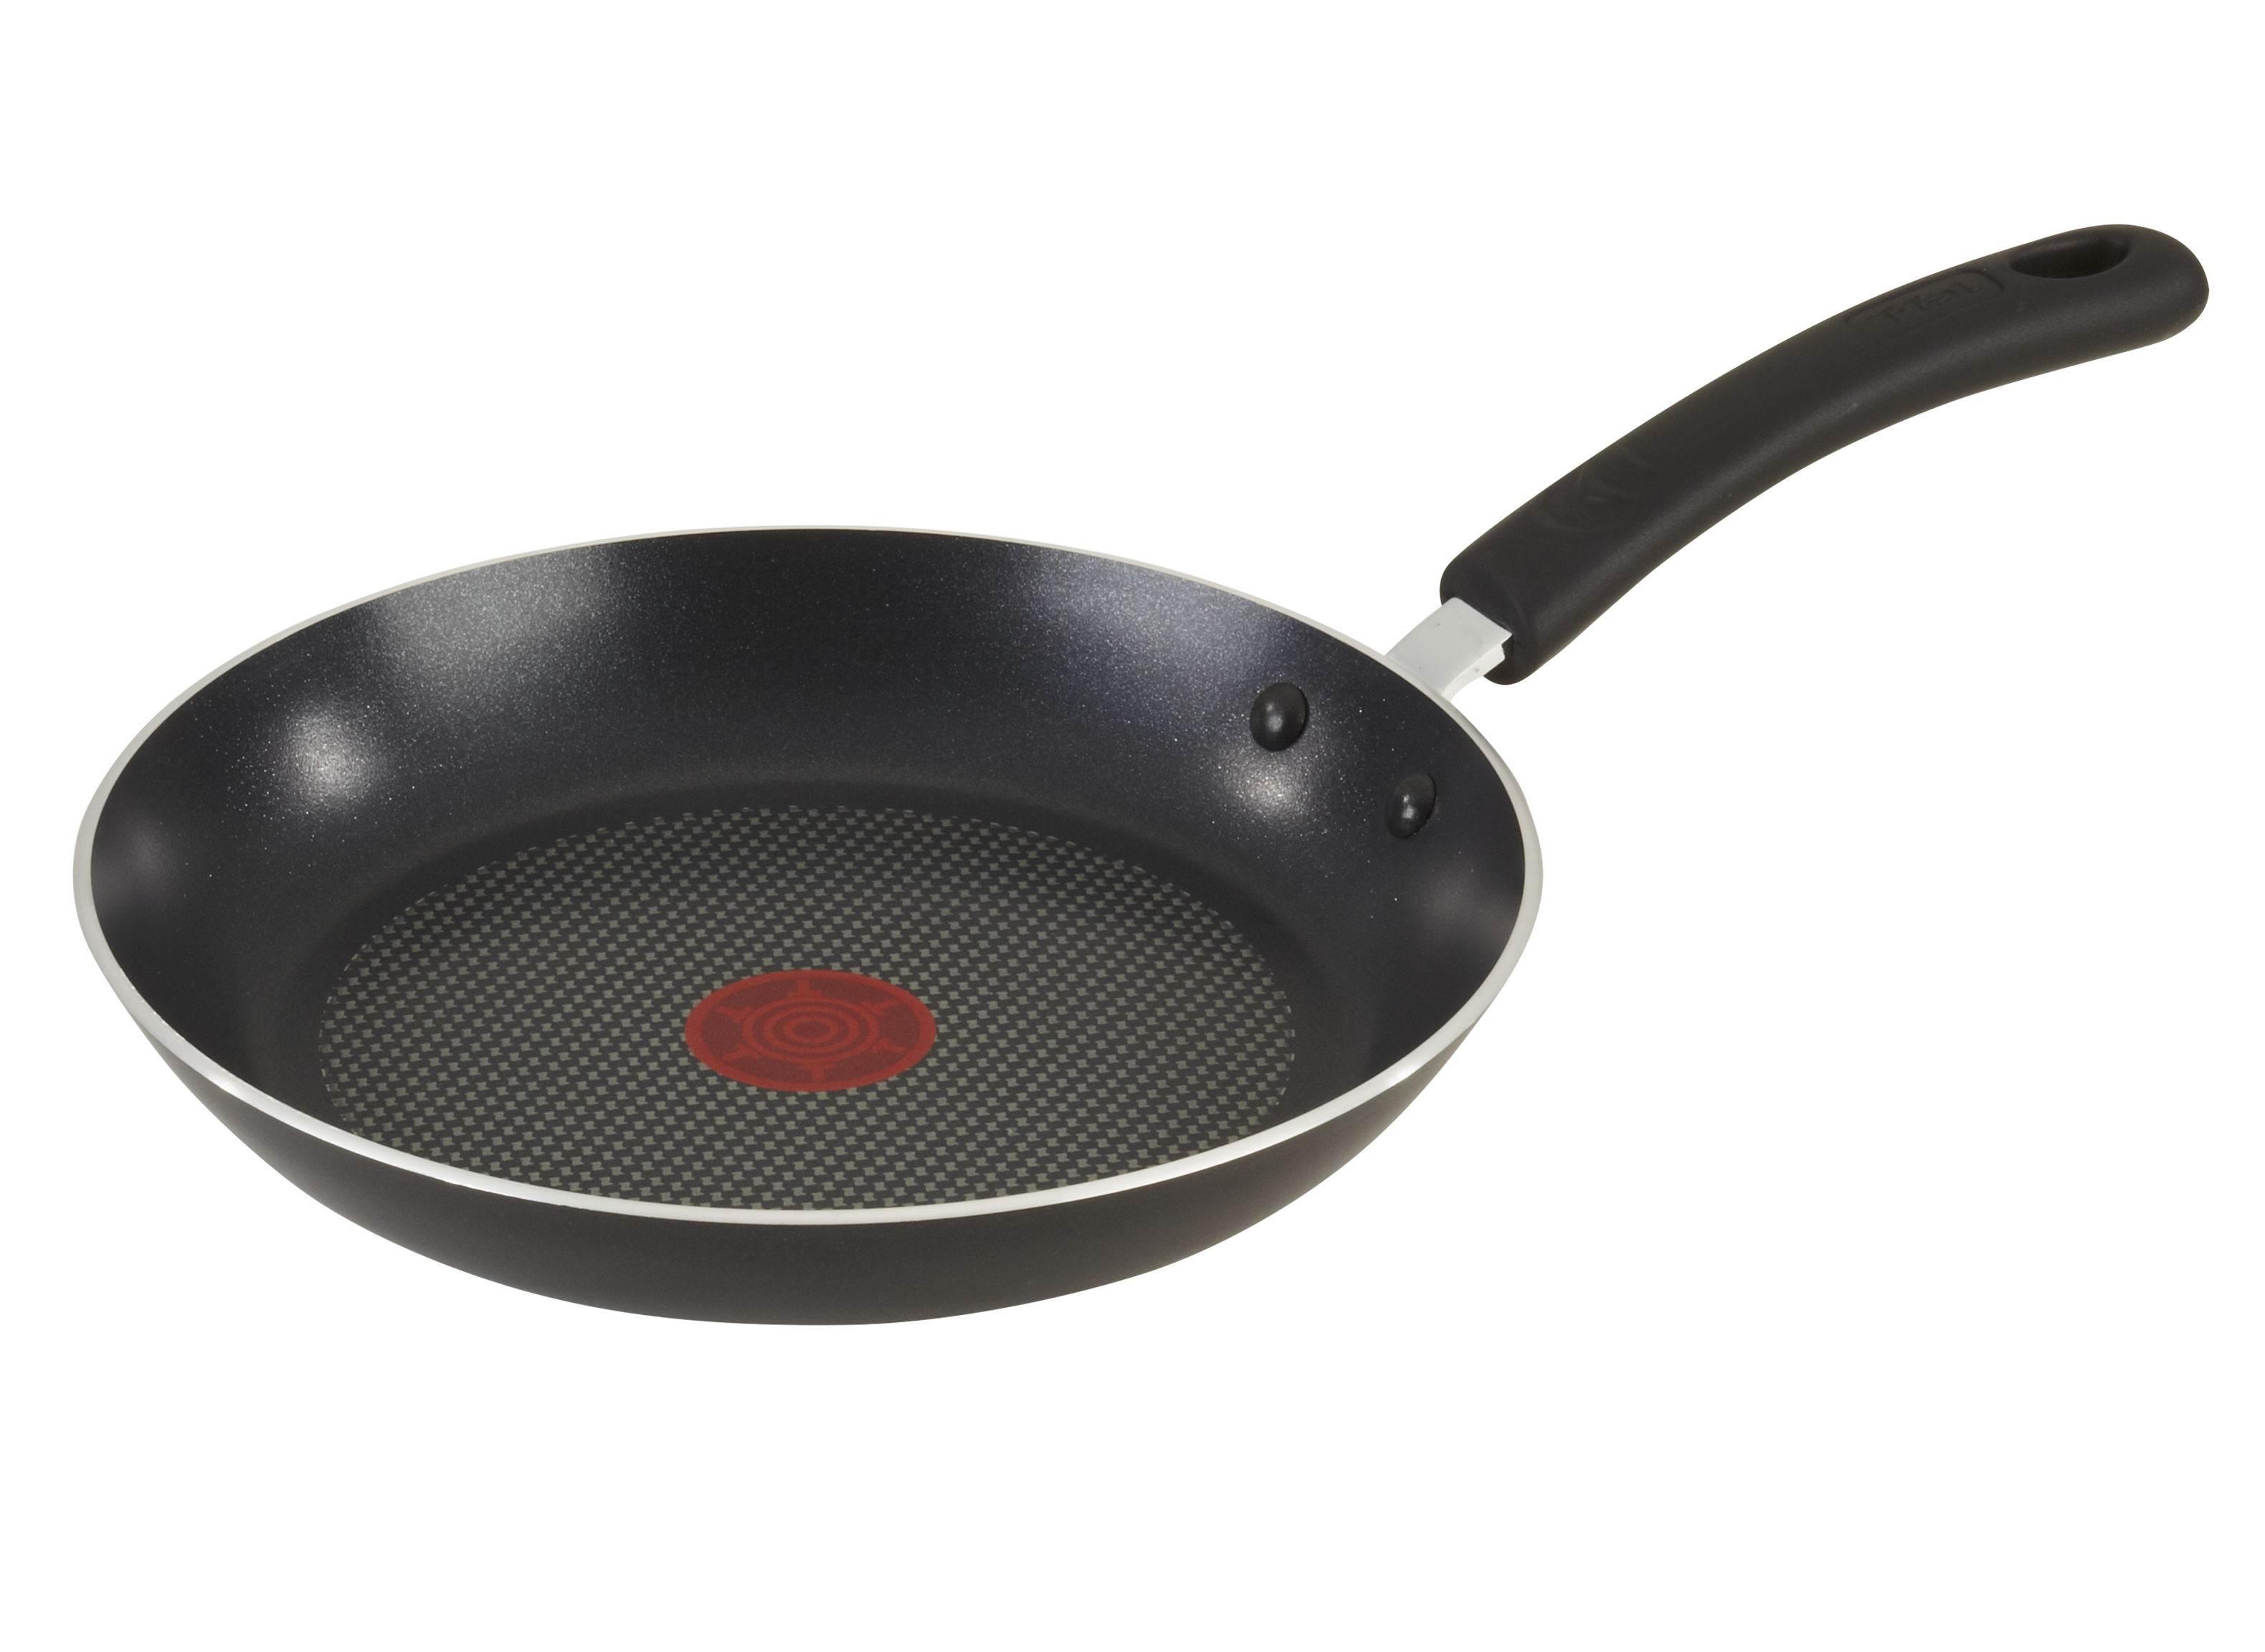 https://crdms.images.consumerreports.org/prod/products/cr/models/393373-fryingpans-tfal-professionale9380584nonstick.png